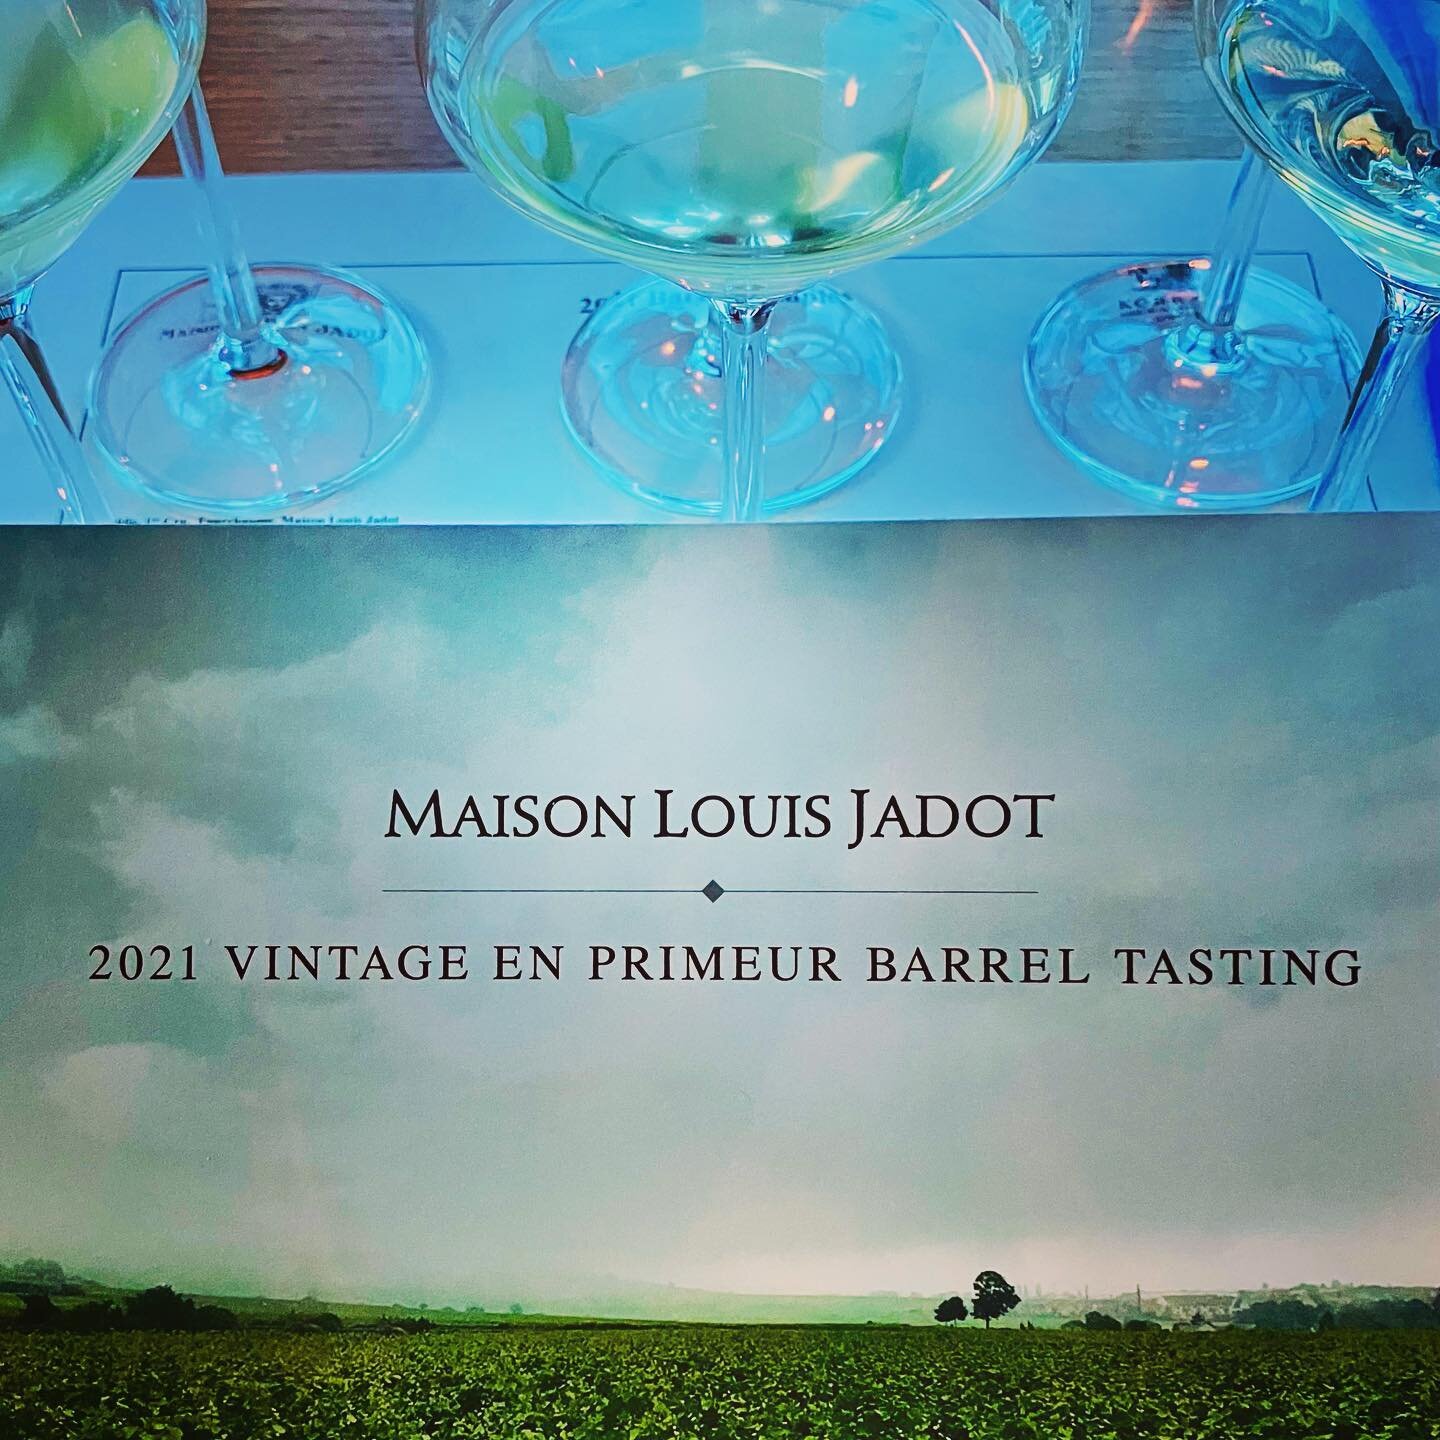 Thank you @louisjadot for a wonderful tasting and overview of the 2021 vintage. The quality of Jadot wines stretches far with 35 individual vineyard sites from which they produce their collection of estate wines. One hidden gem for me was the La Domi